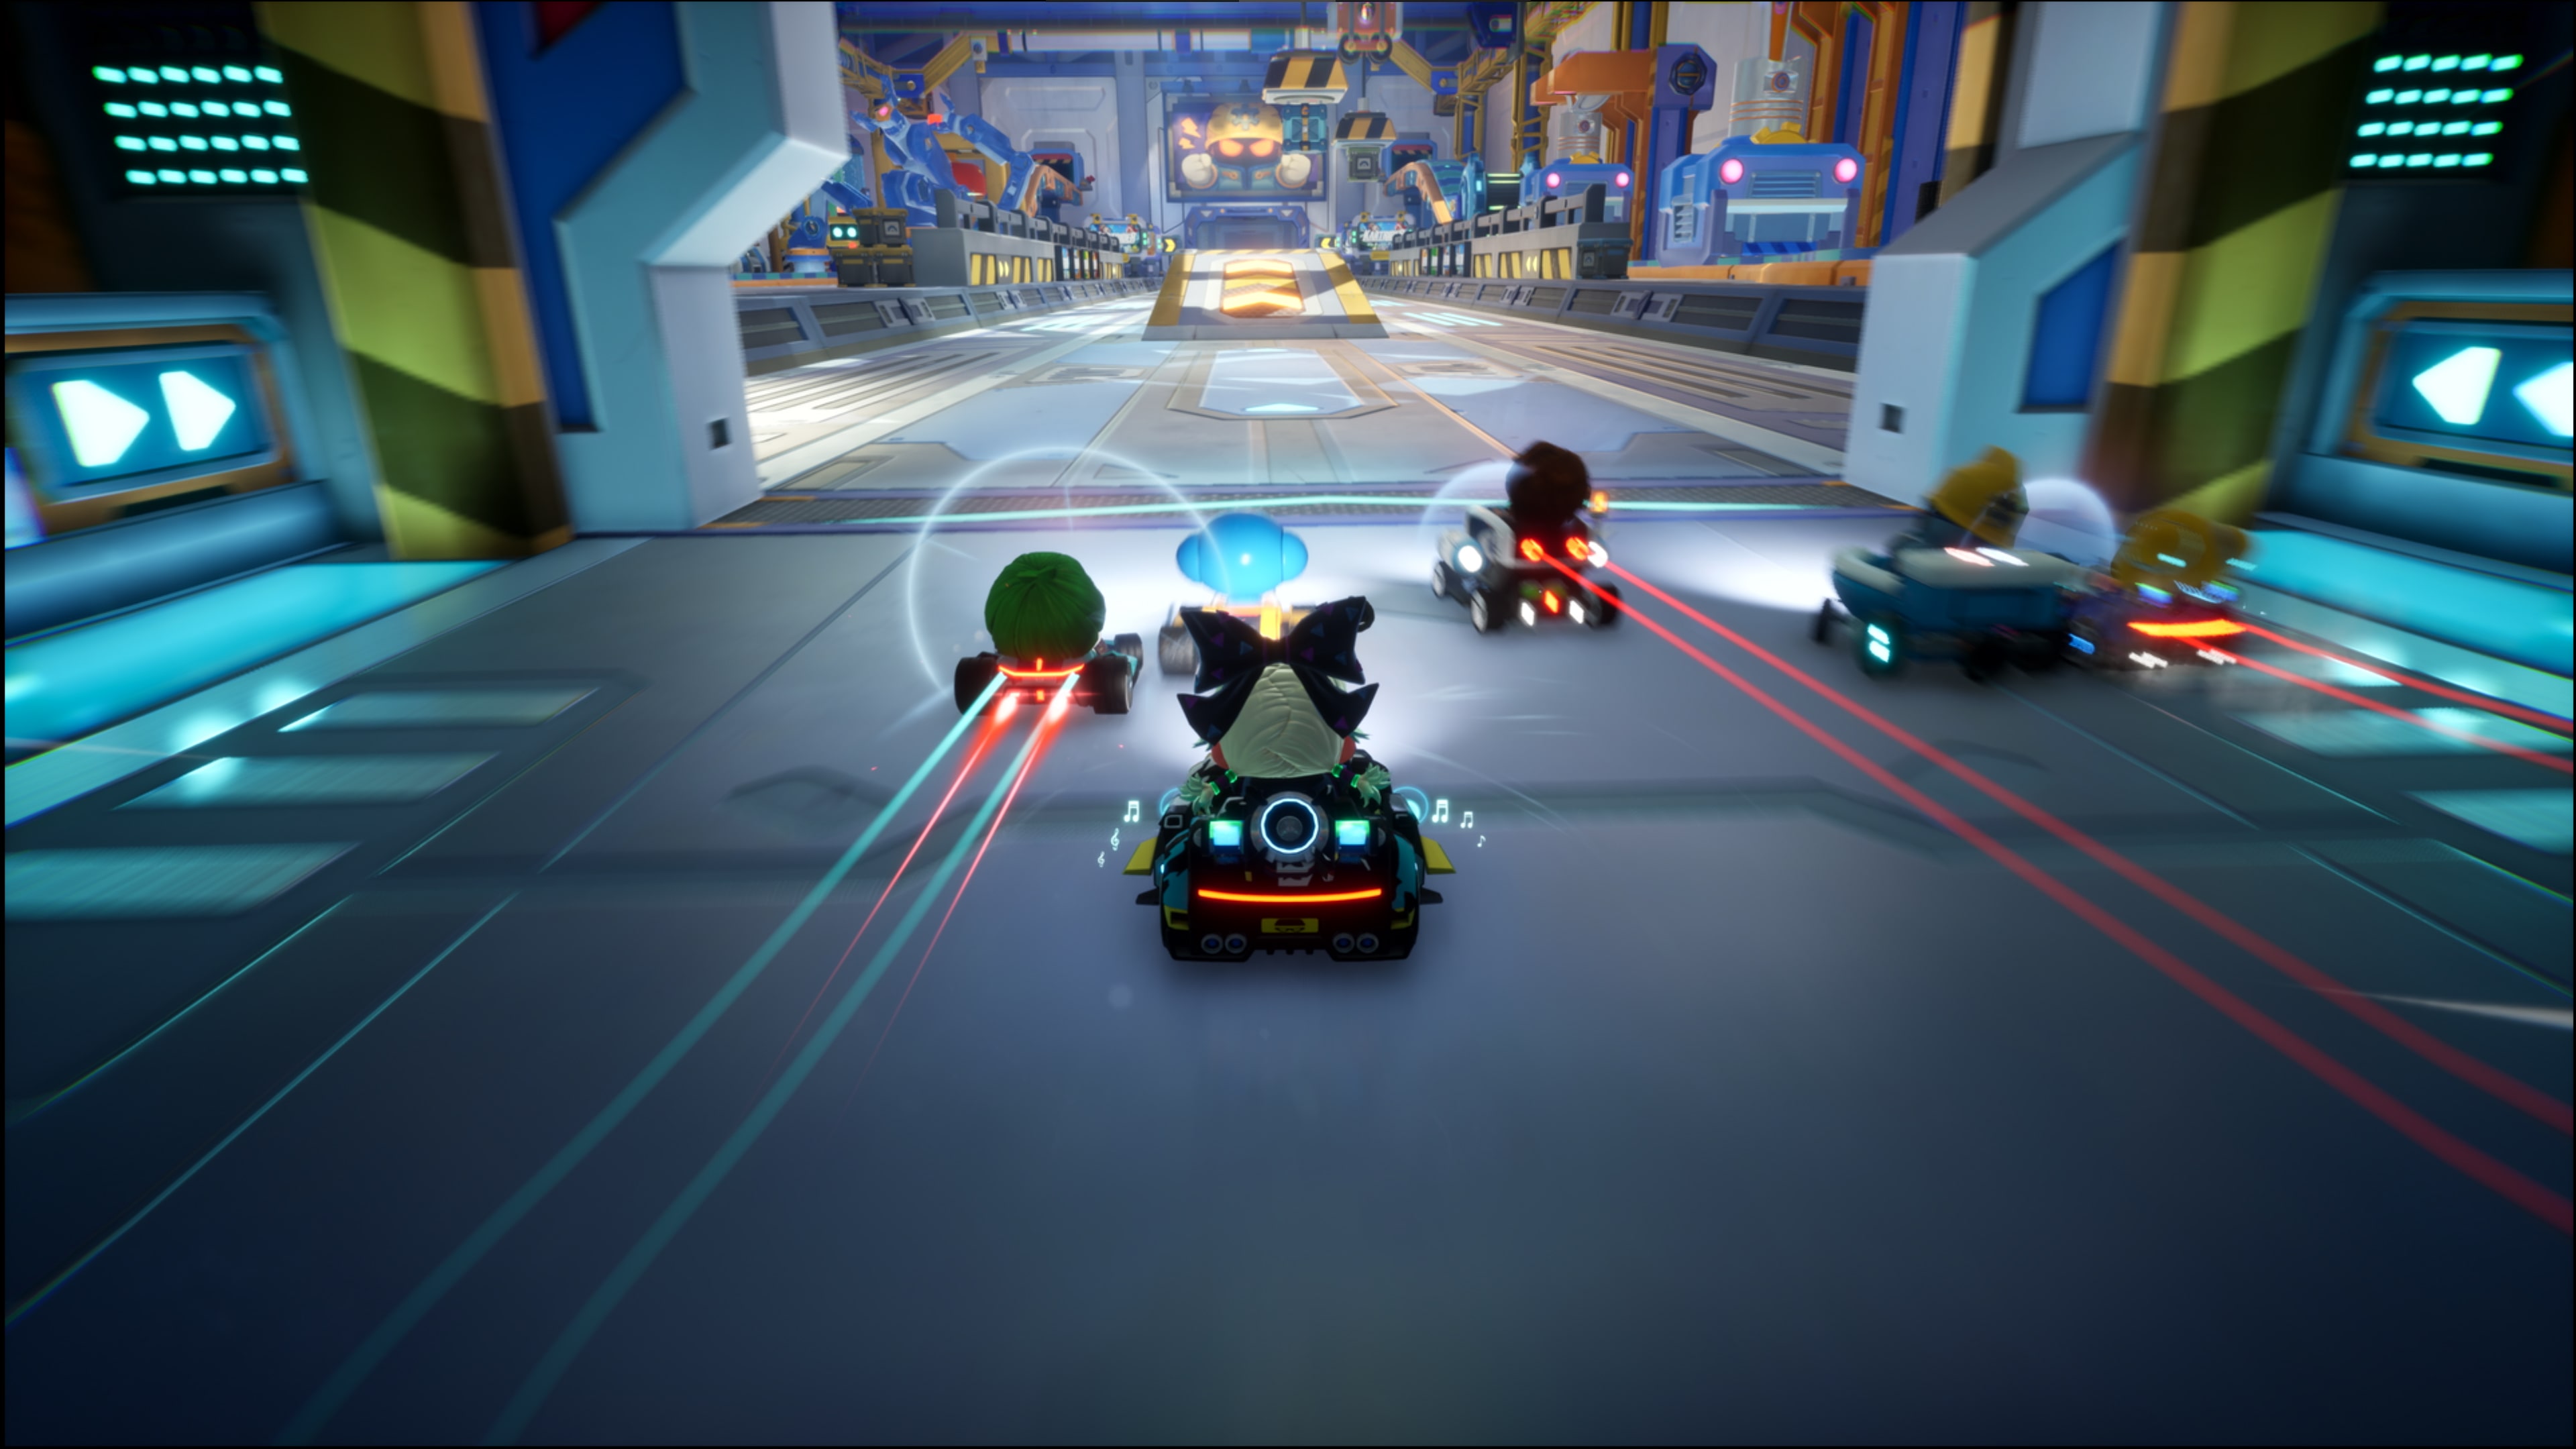 KartRider: Drift – a free-to-play kart racer – lands on PS4 and PS5 in 2022